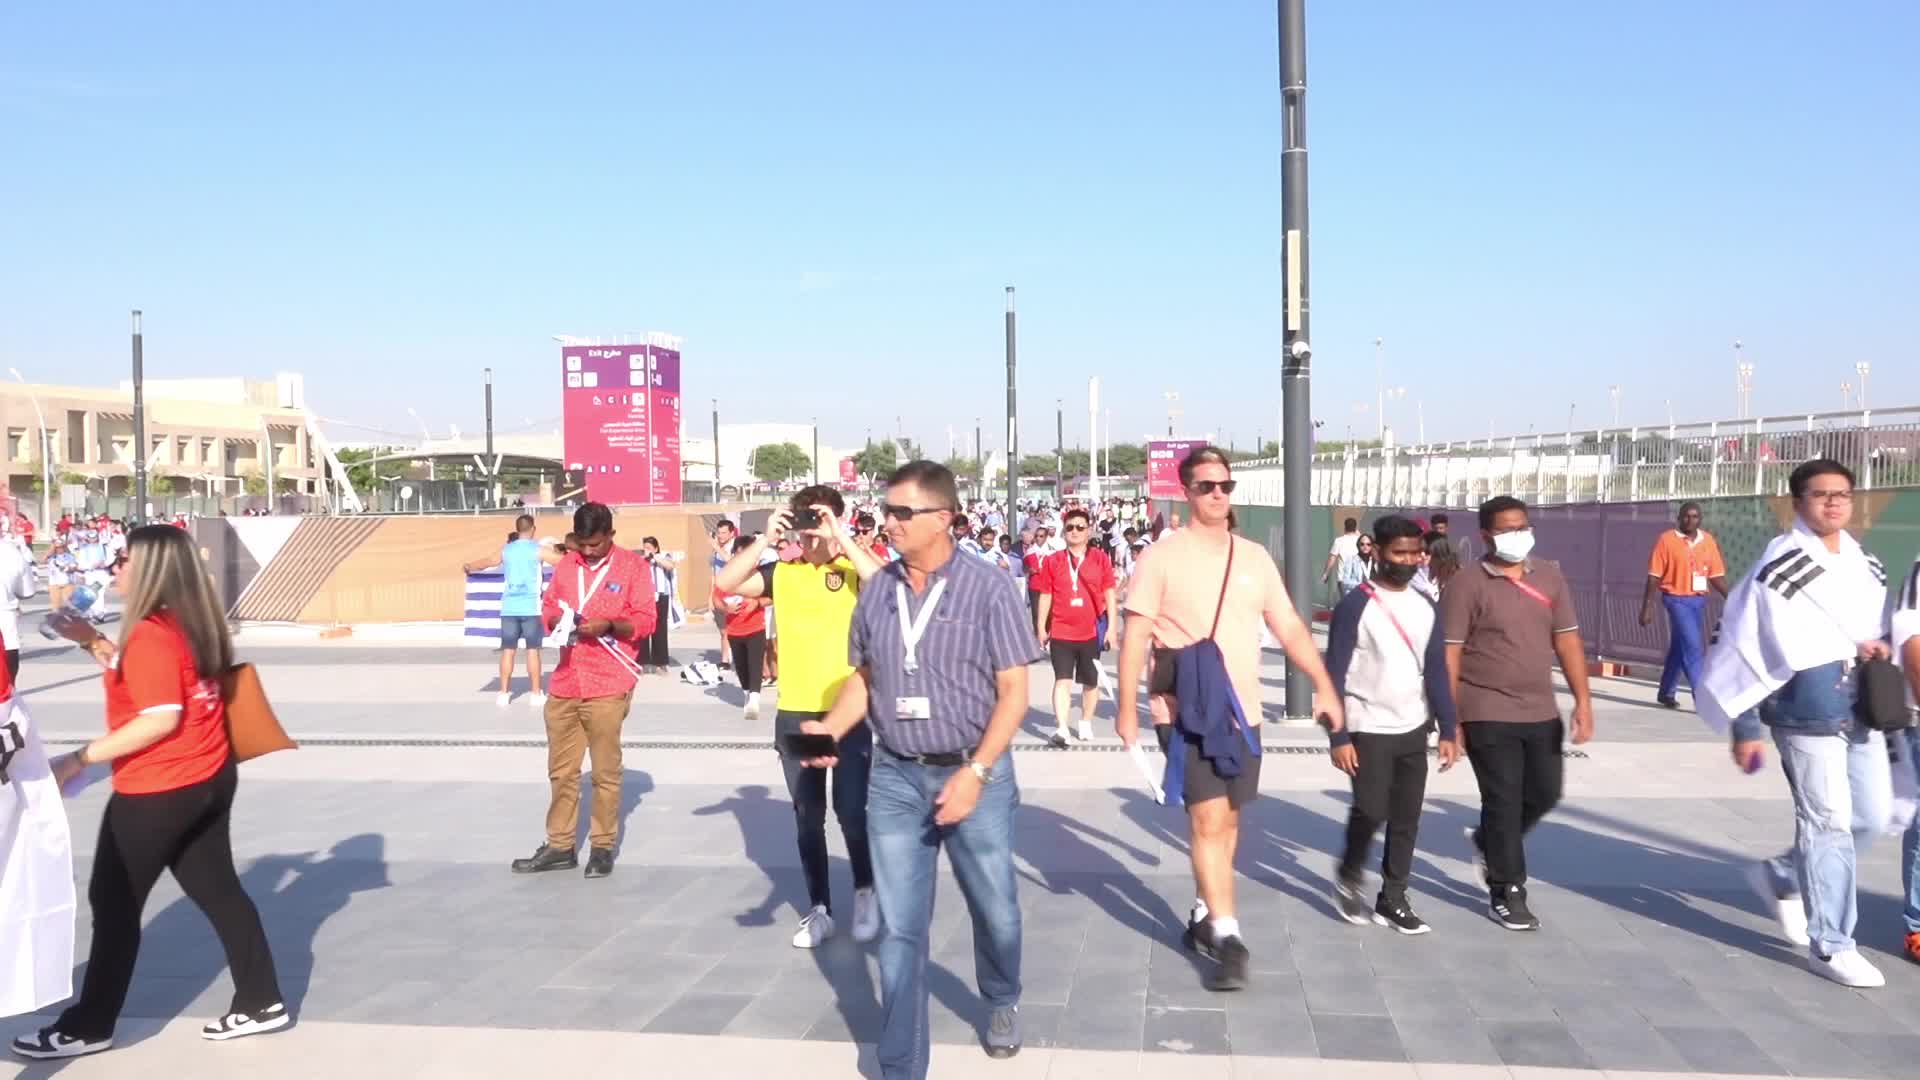 Fans arrive at Education City Stadium for the World Cup Match between Uruguay v Korea Republic